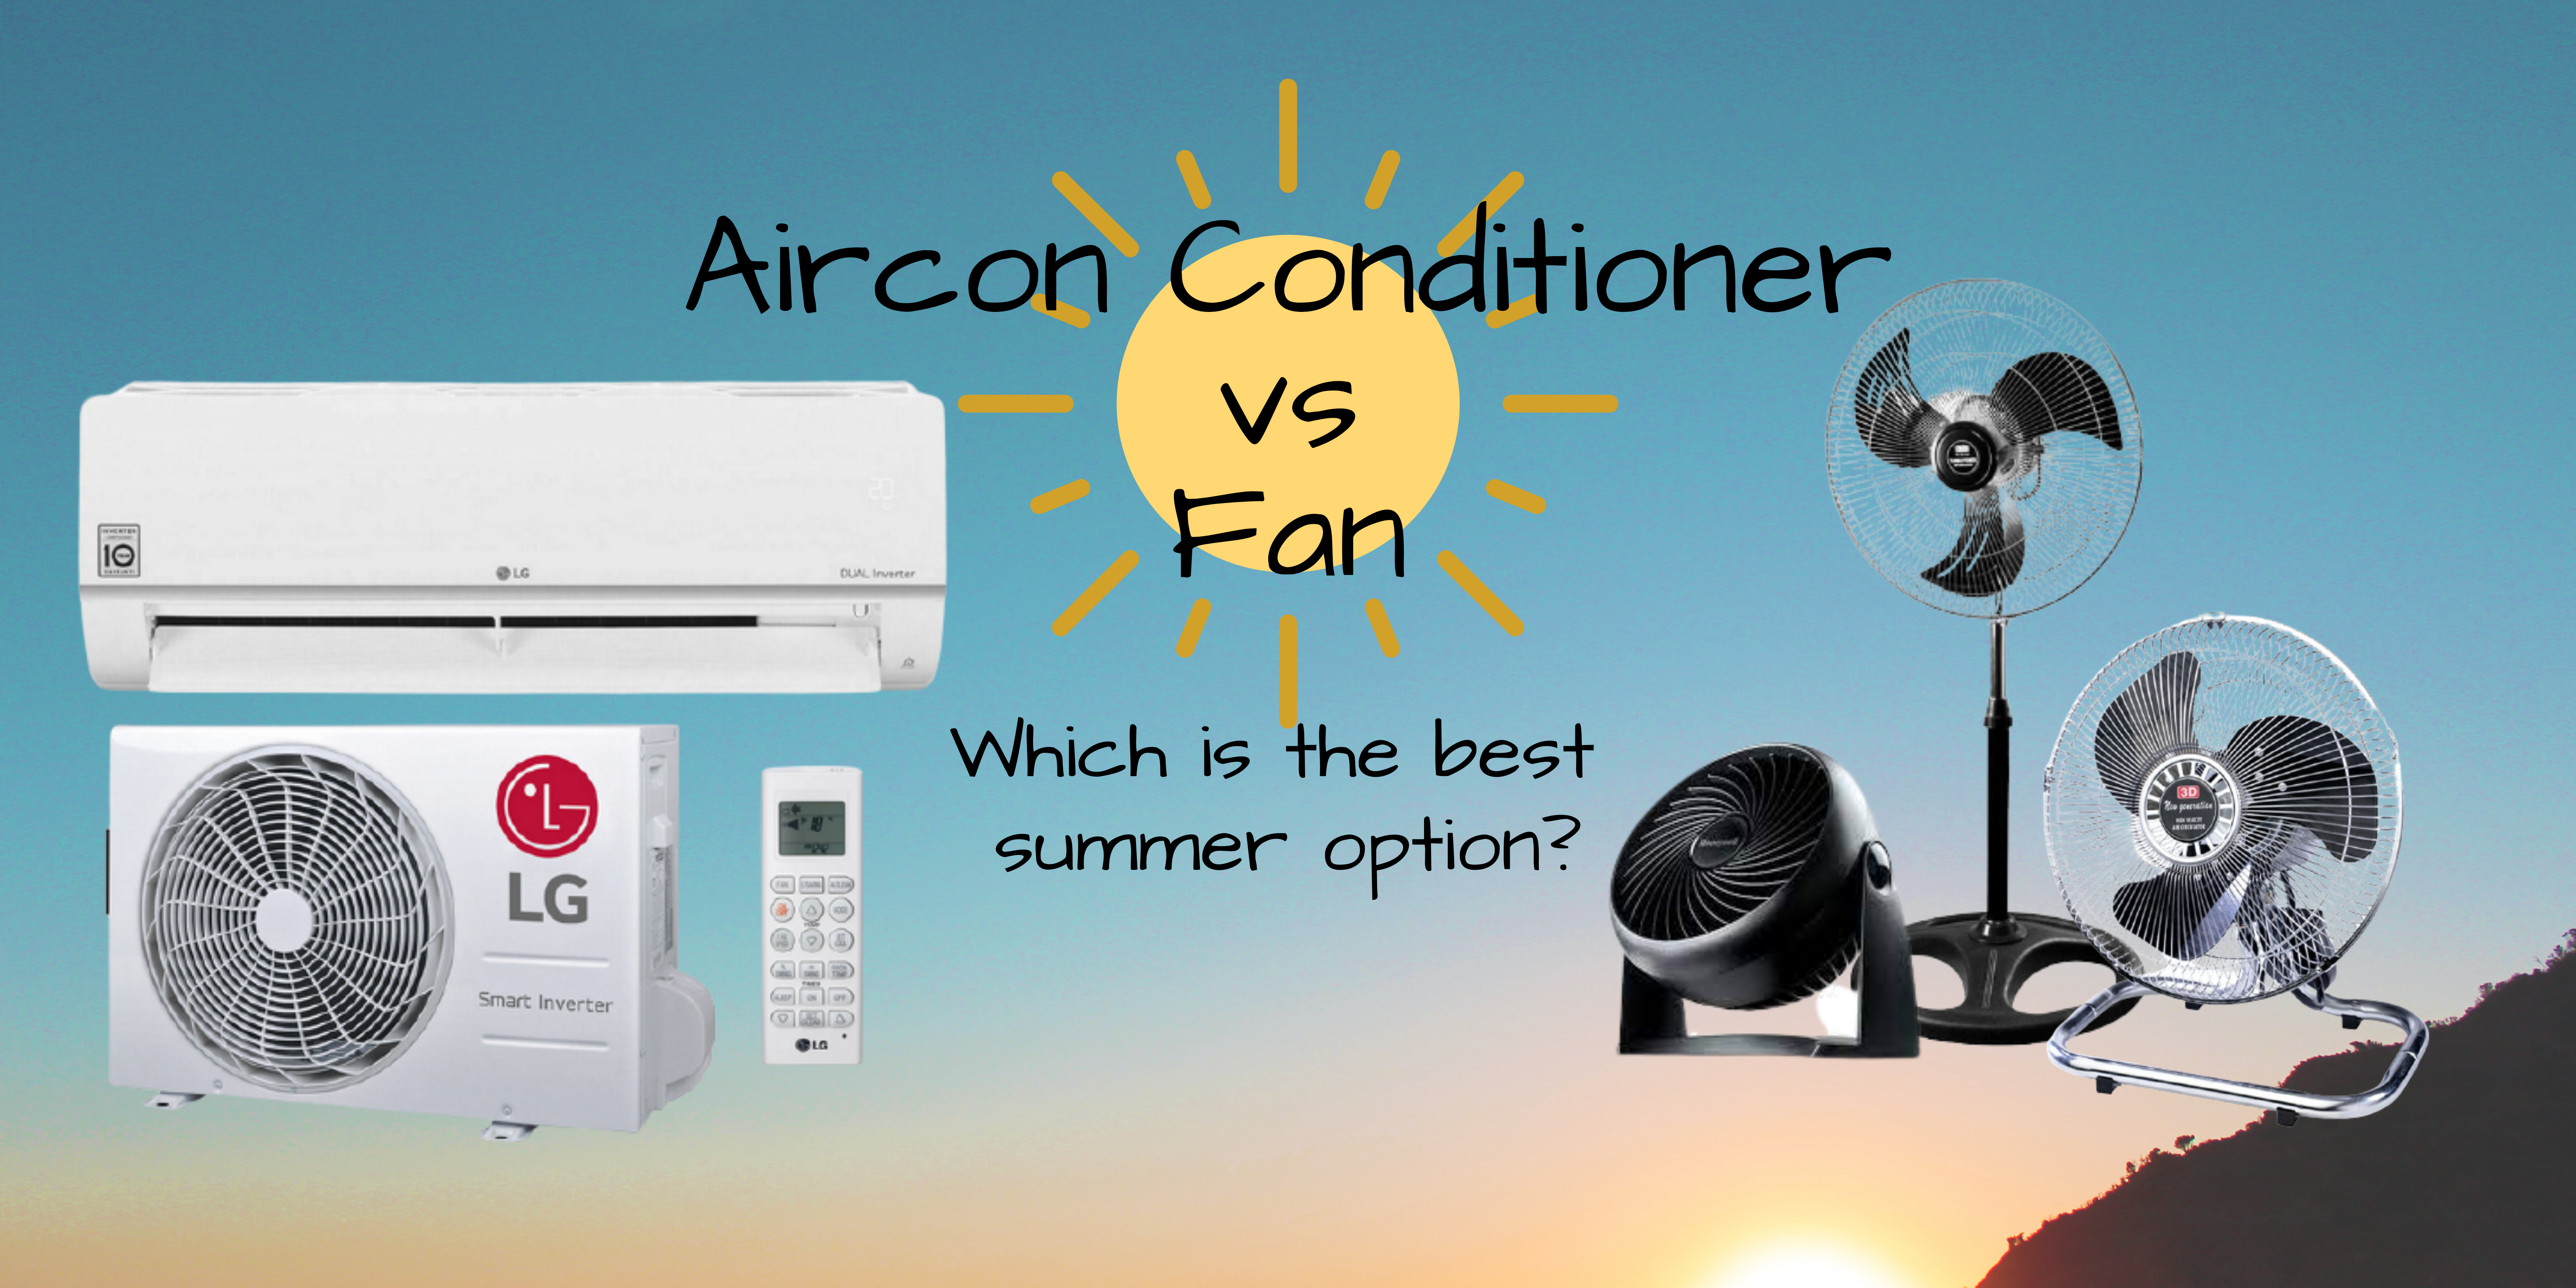 Which is better for summer: an AIR CONDITIONER or a FAN?